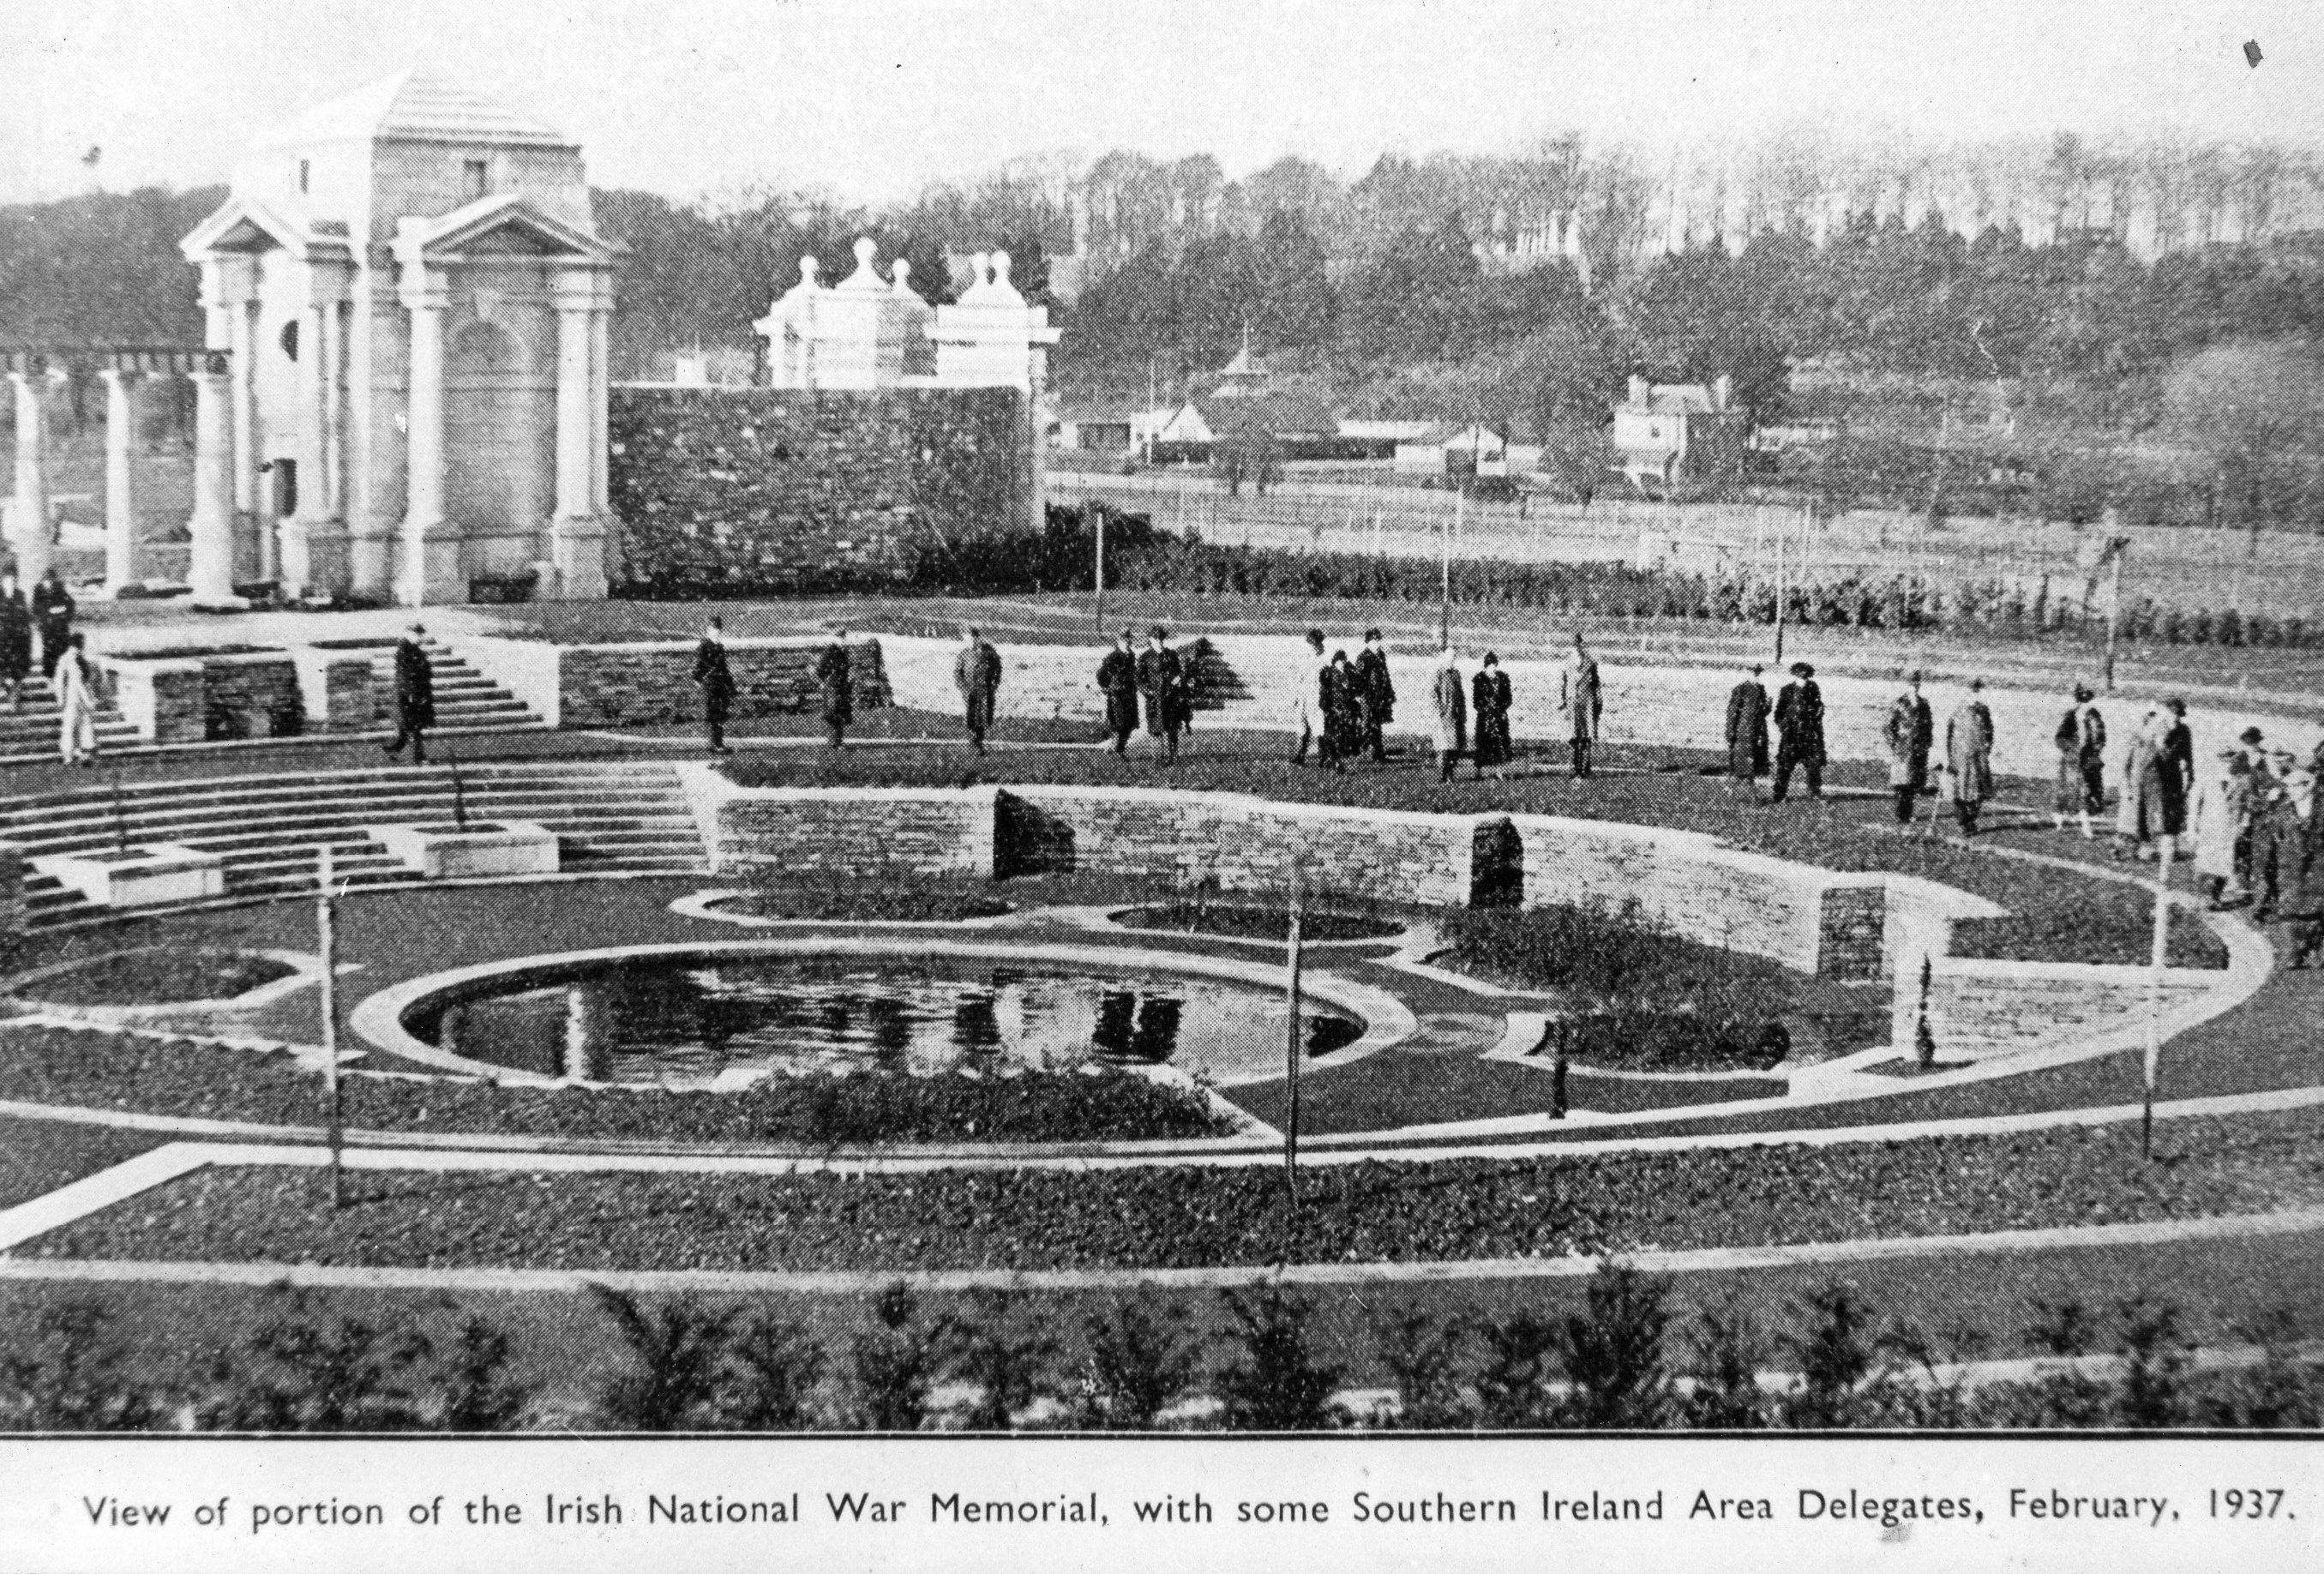 1937 view of the Gardens. OPW. 